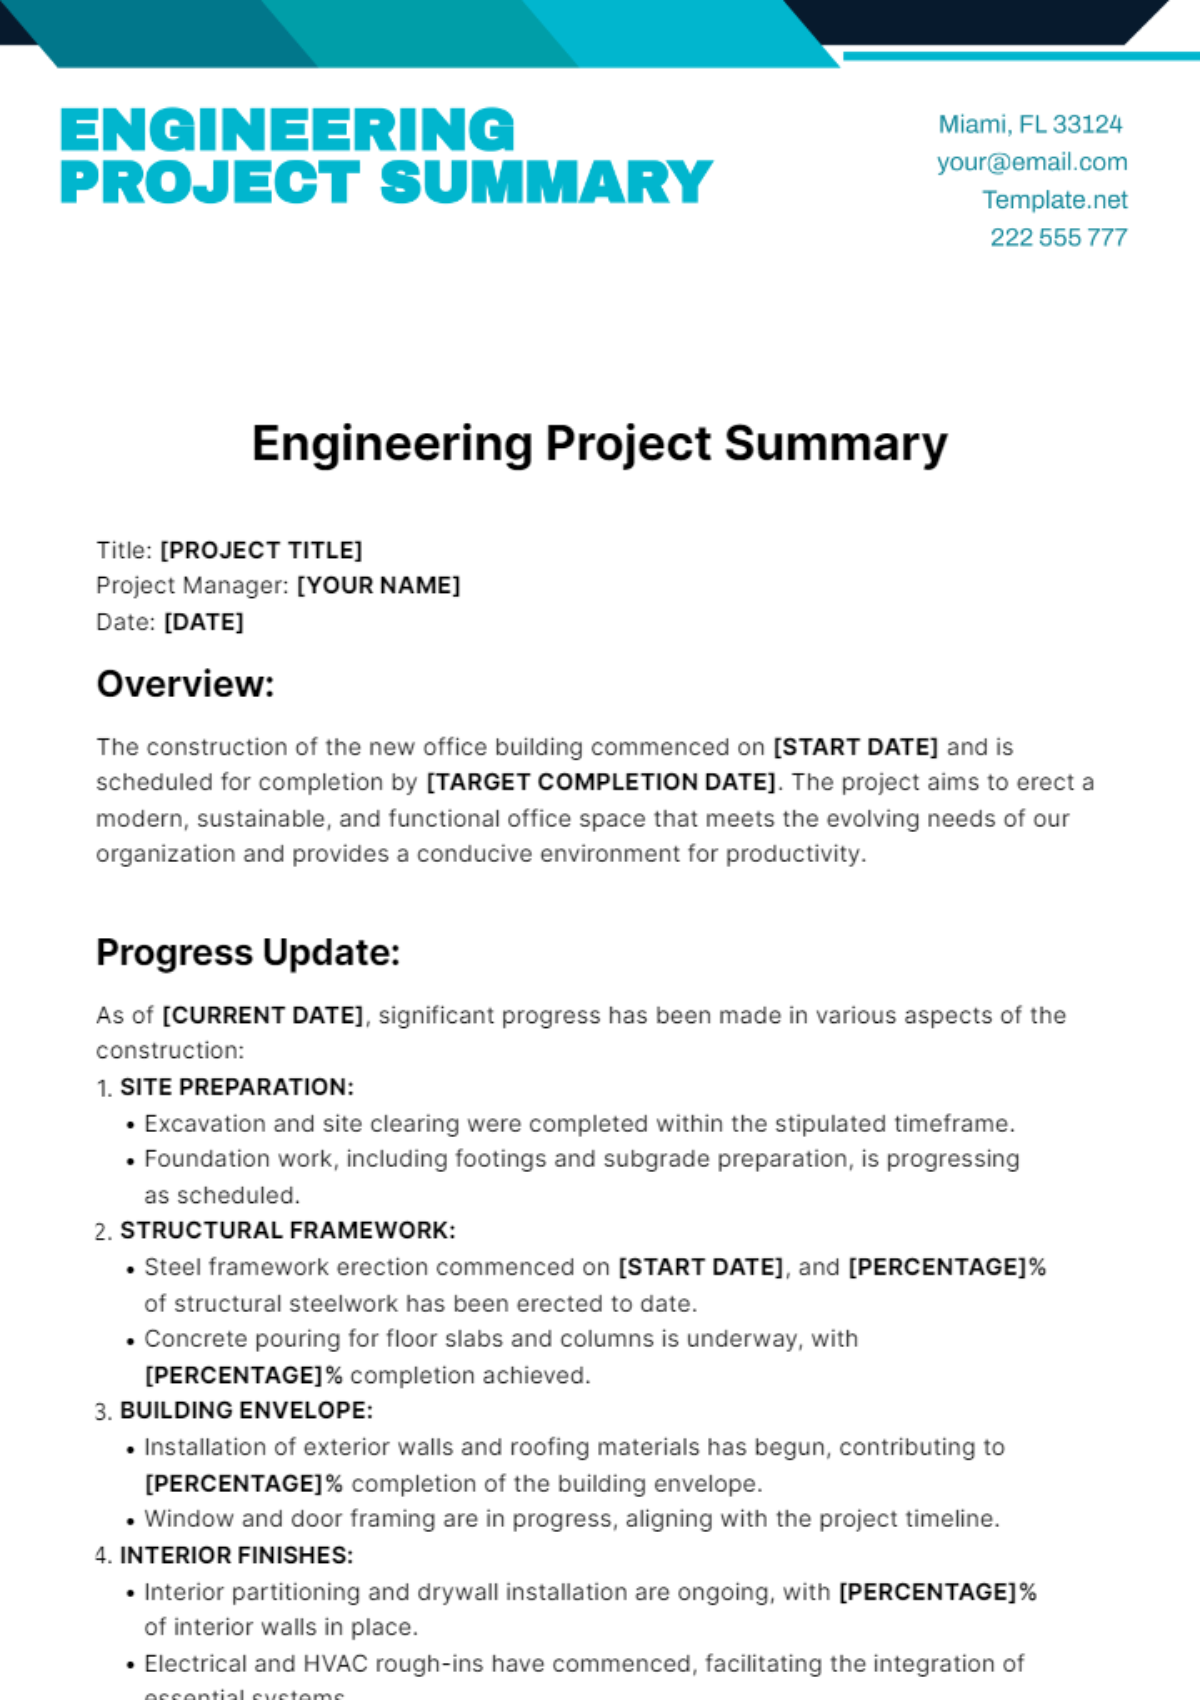 Engineering Project Summary Template